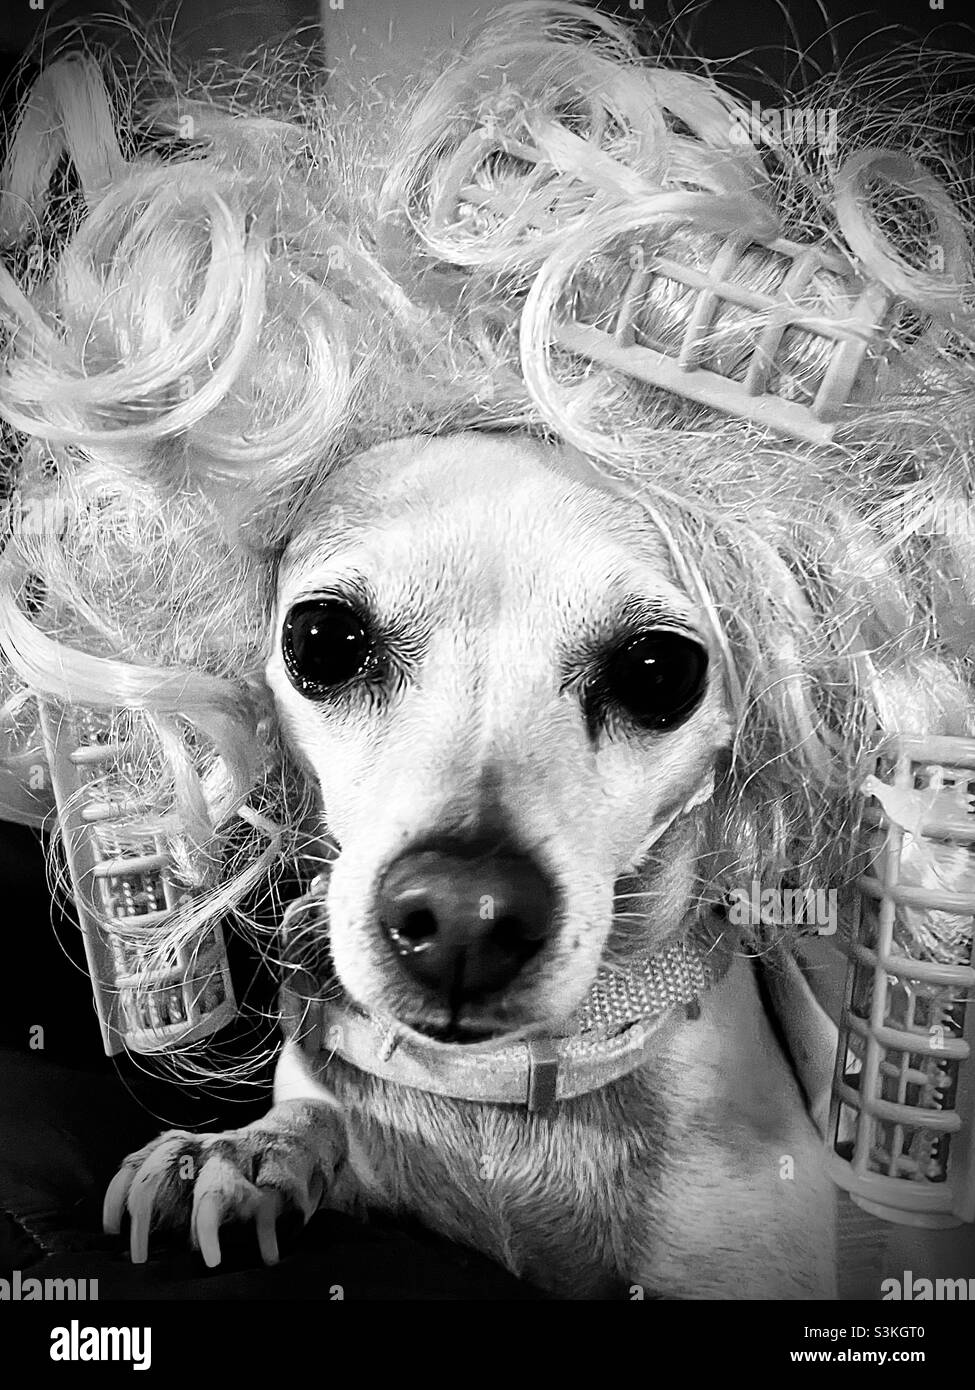 Black and white close up portrait of a fawn chihuahua dog dressed in a wig with hair curlers rolled into the wig. The dog is looking directly at the camera face forward. Silly and fun image. Stock Photo